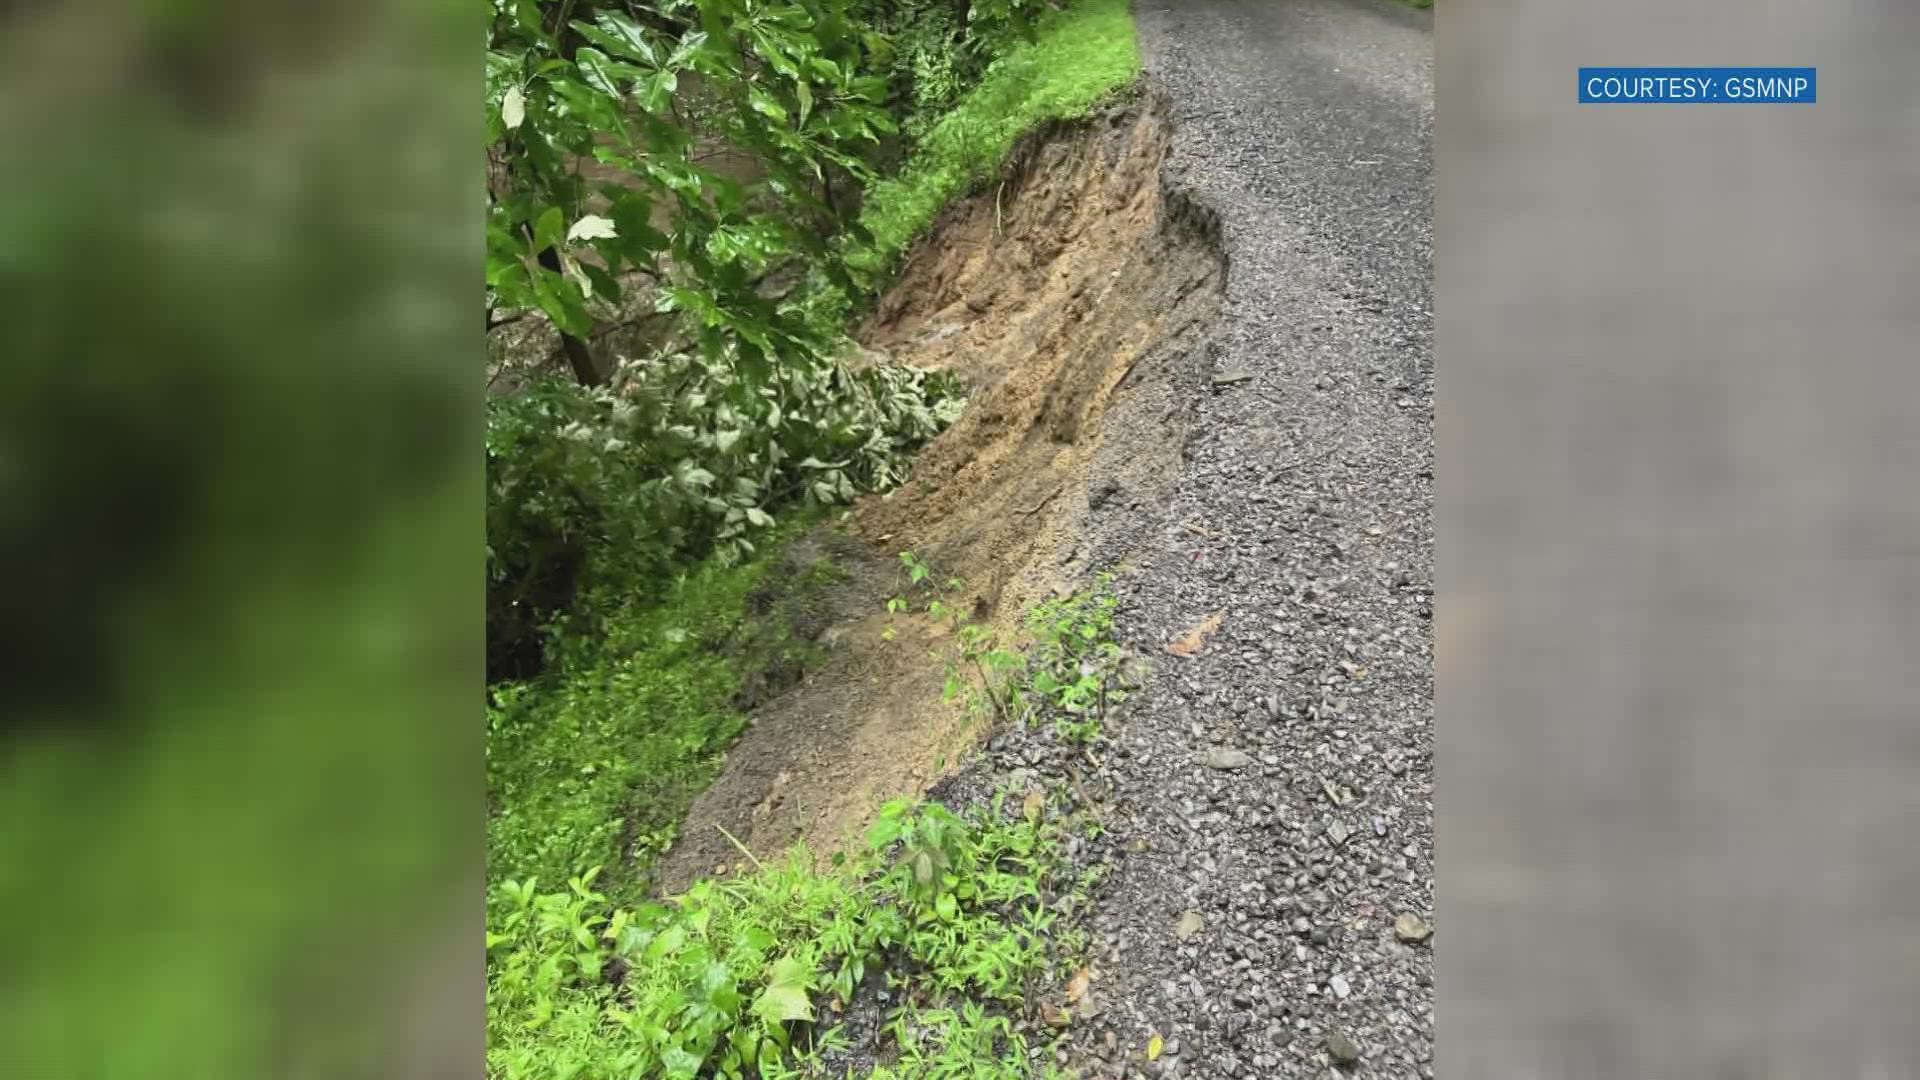 National park officials said the roads were further damaged due to floodwaters that caused a slide and made the roads unstable.